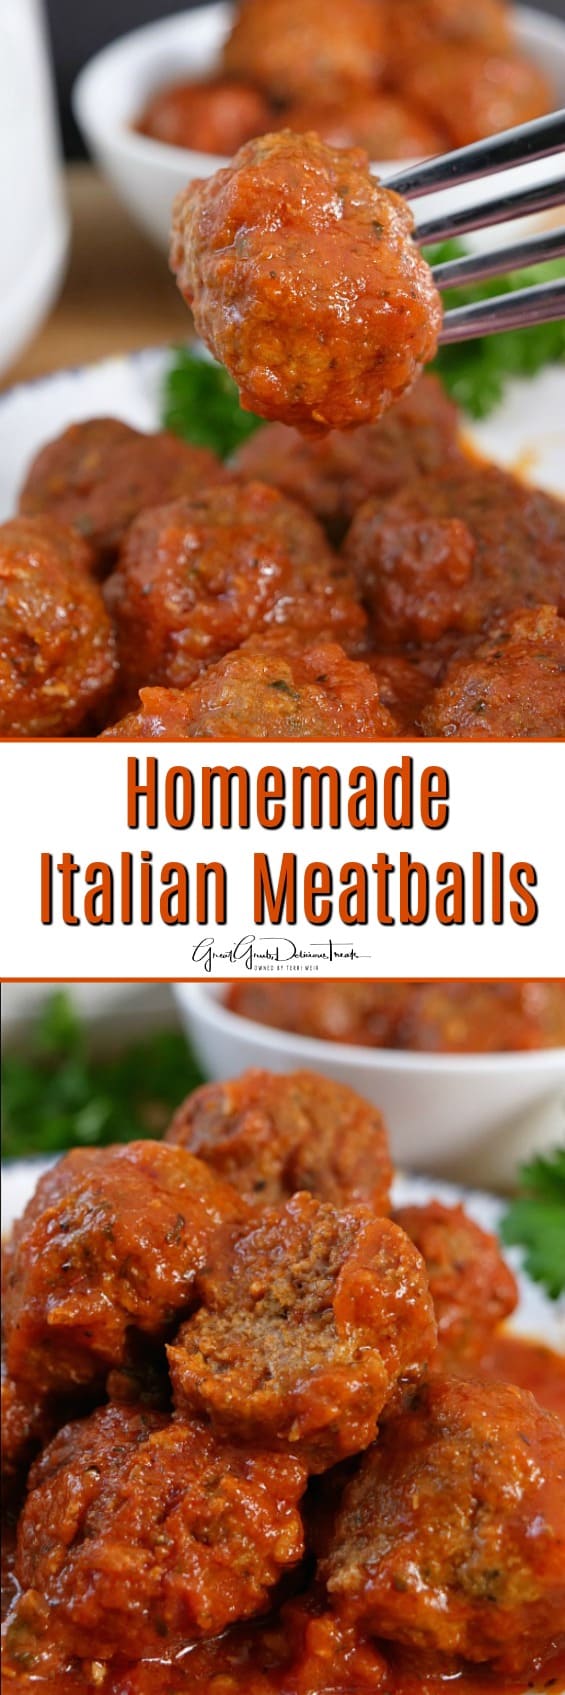 A double collage photo of homemade meatballs.